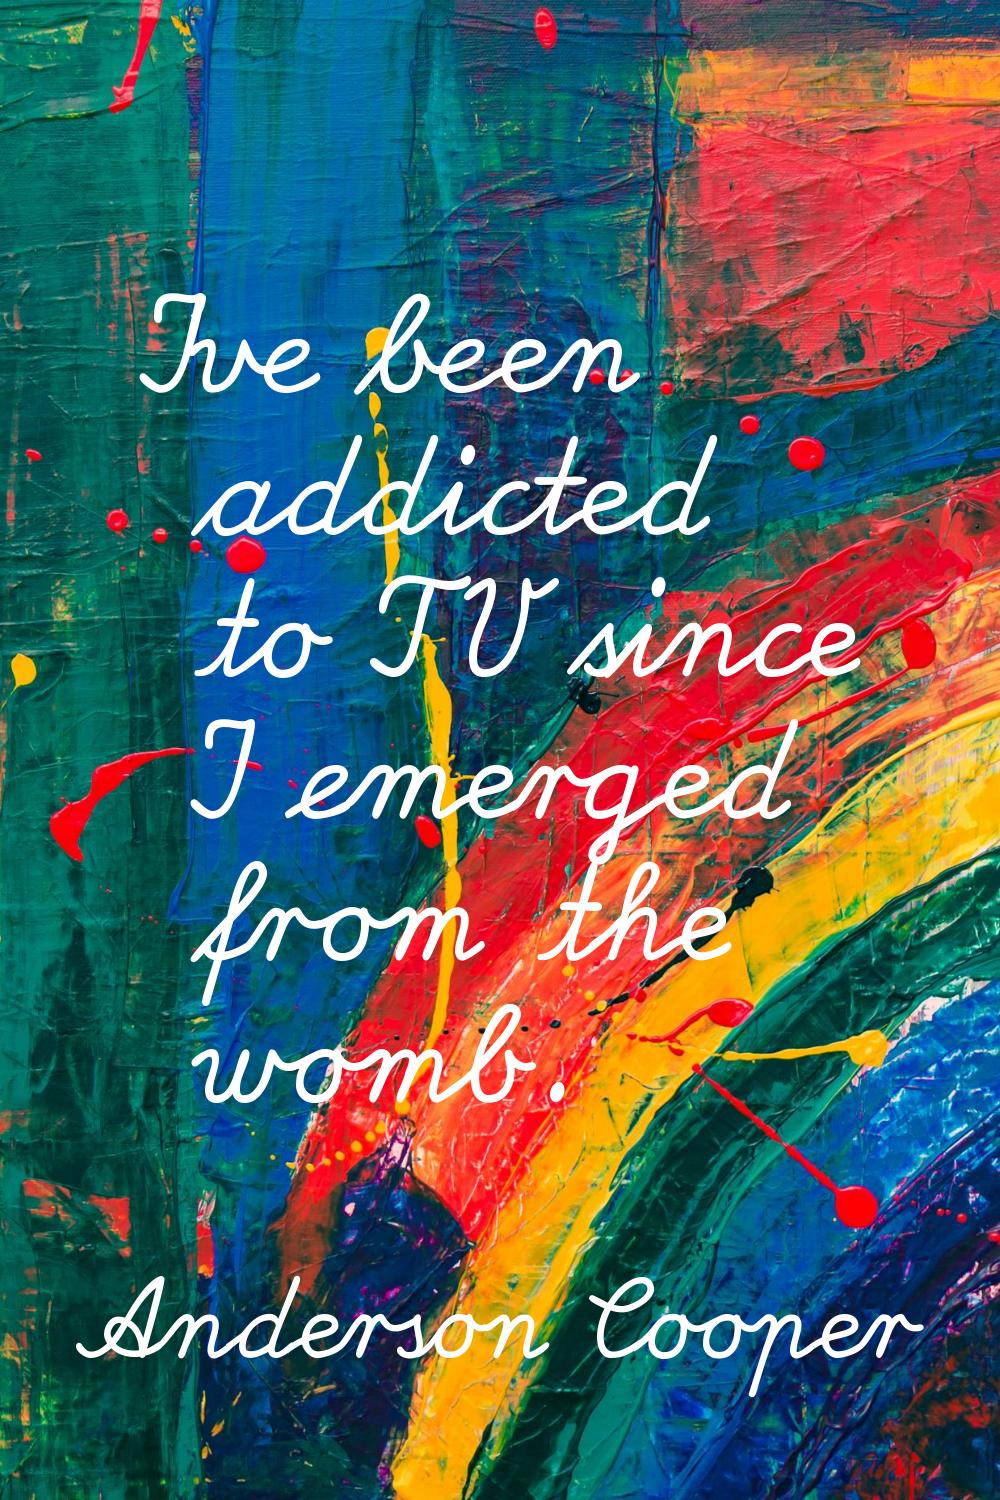 I've been addicted to TV since I emerged from the womb.